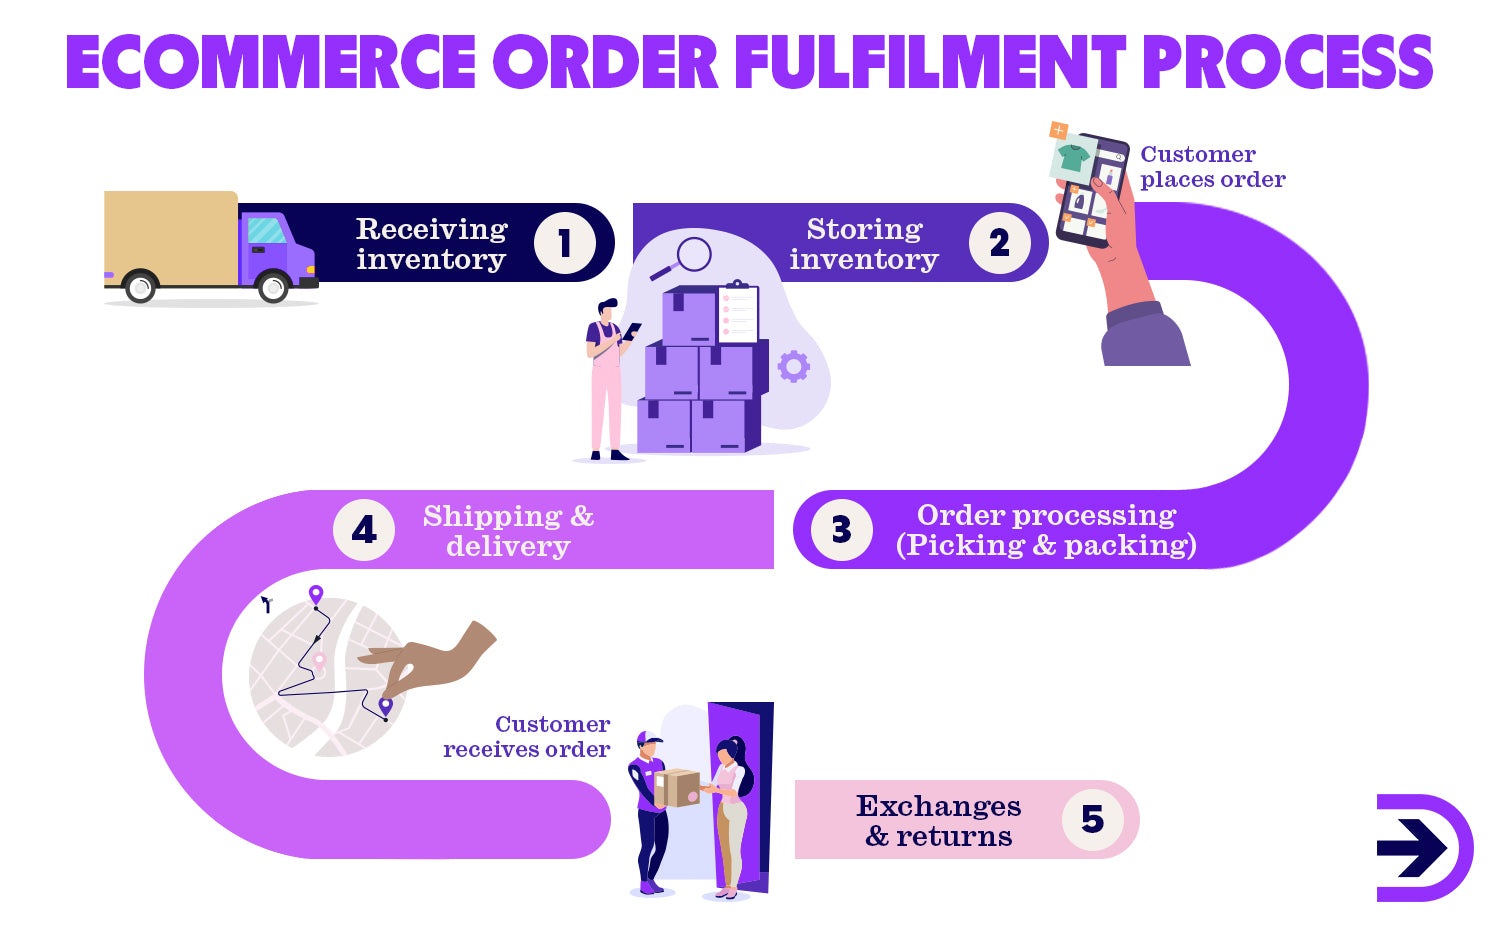 The ecommerce order fulfilment process: Receiving, managing and storing, order processing, shipping and delivery, exchanges and returns.